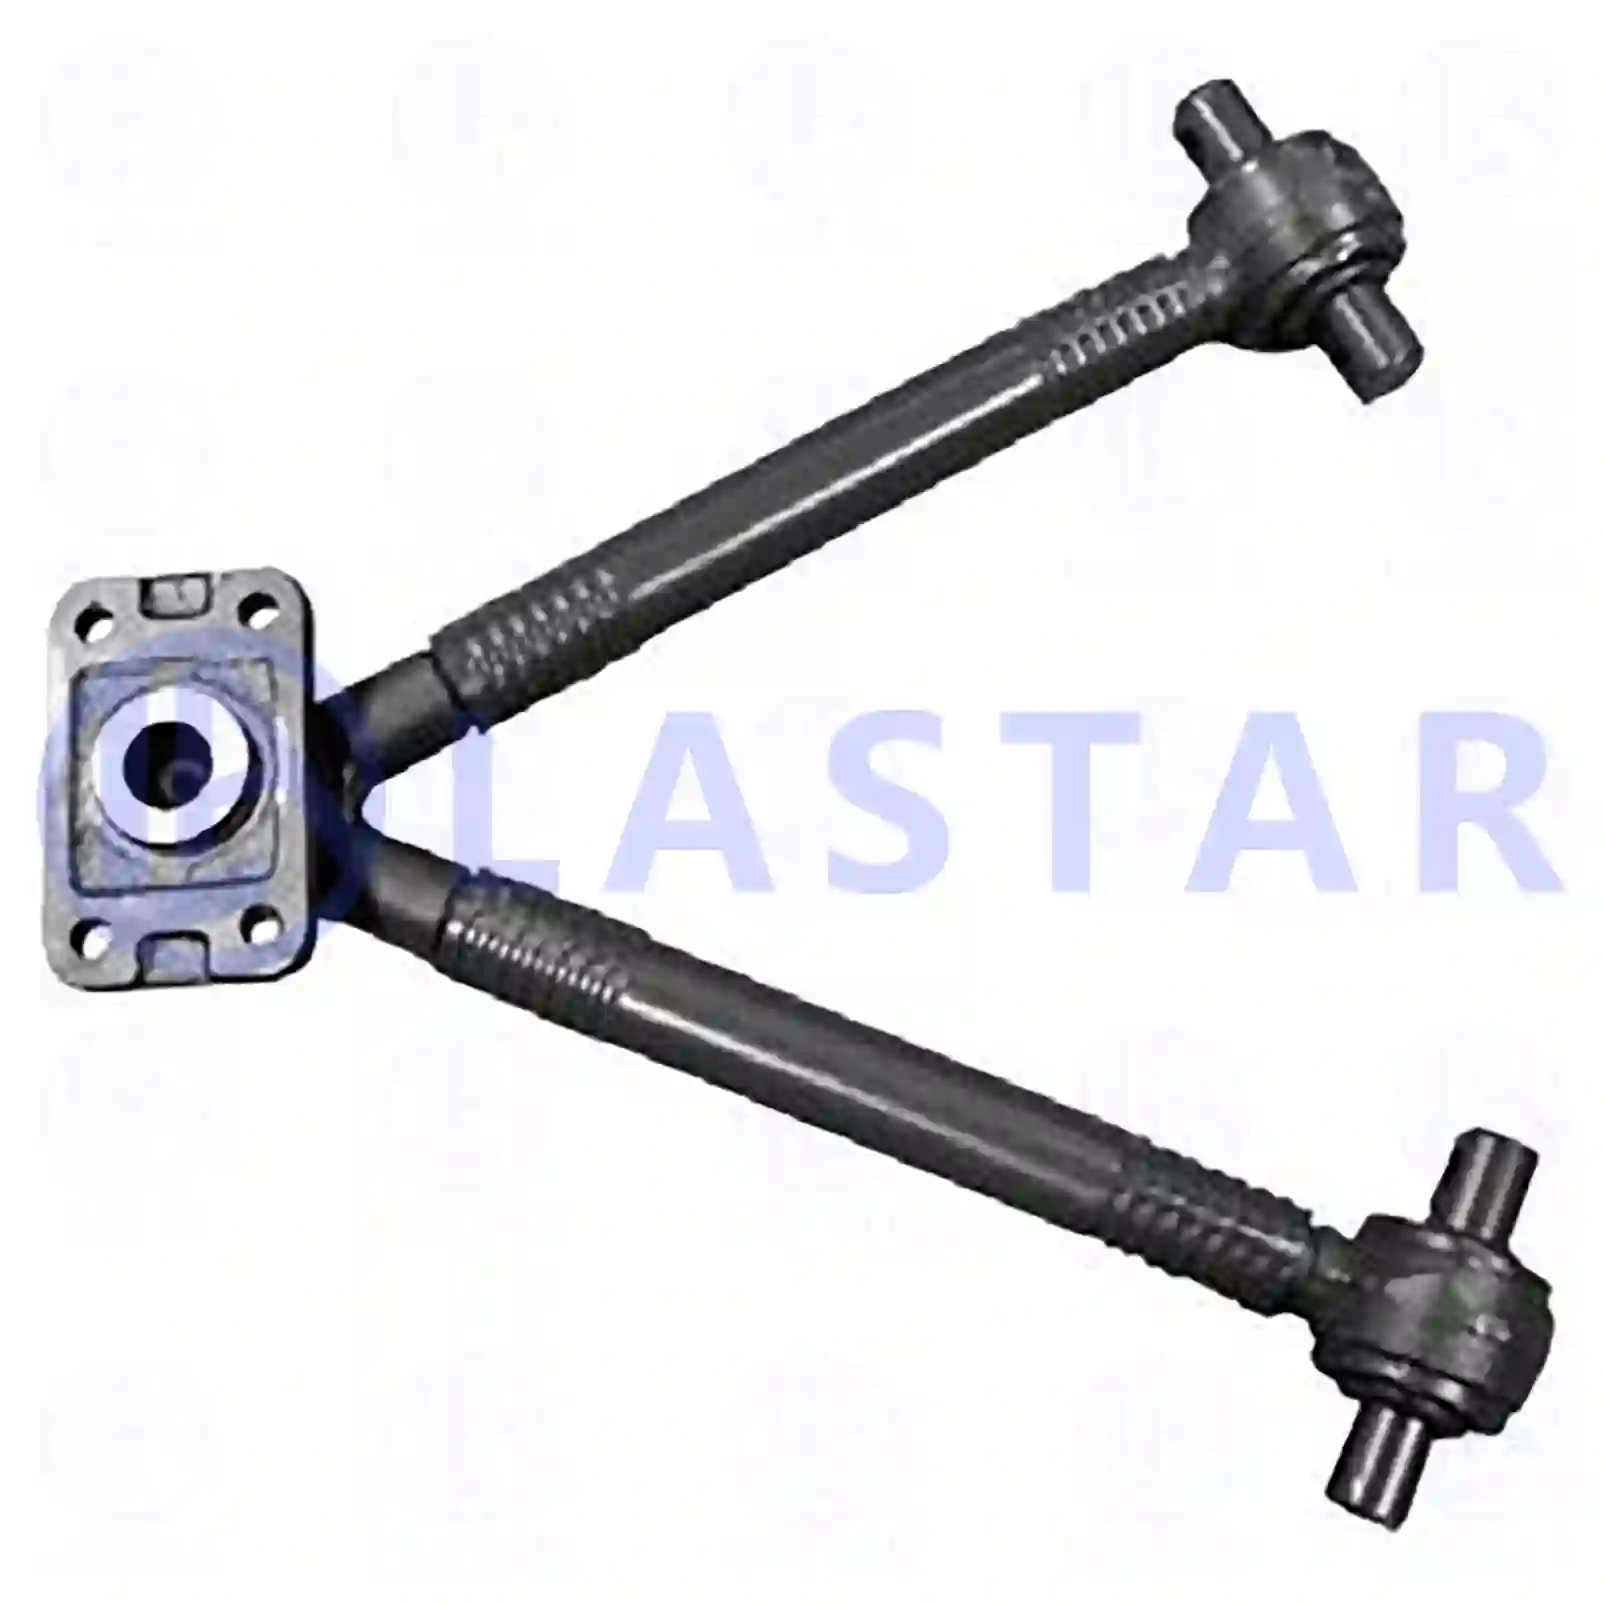 V-stay, 77727441, 41042093, 500340451, ||  77727441 Lastar Spare Part | Truck Spare Parts, Auotomotive Spare Parts V-stay, 77727441, 41042093, 500340451, ||  77727441 Lastar Spare Part | Truck Spare Parts, Auotomotive Spare Parts